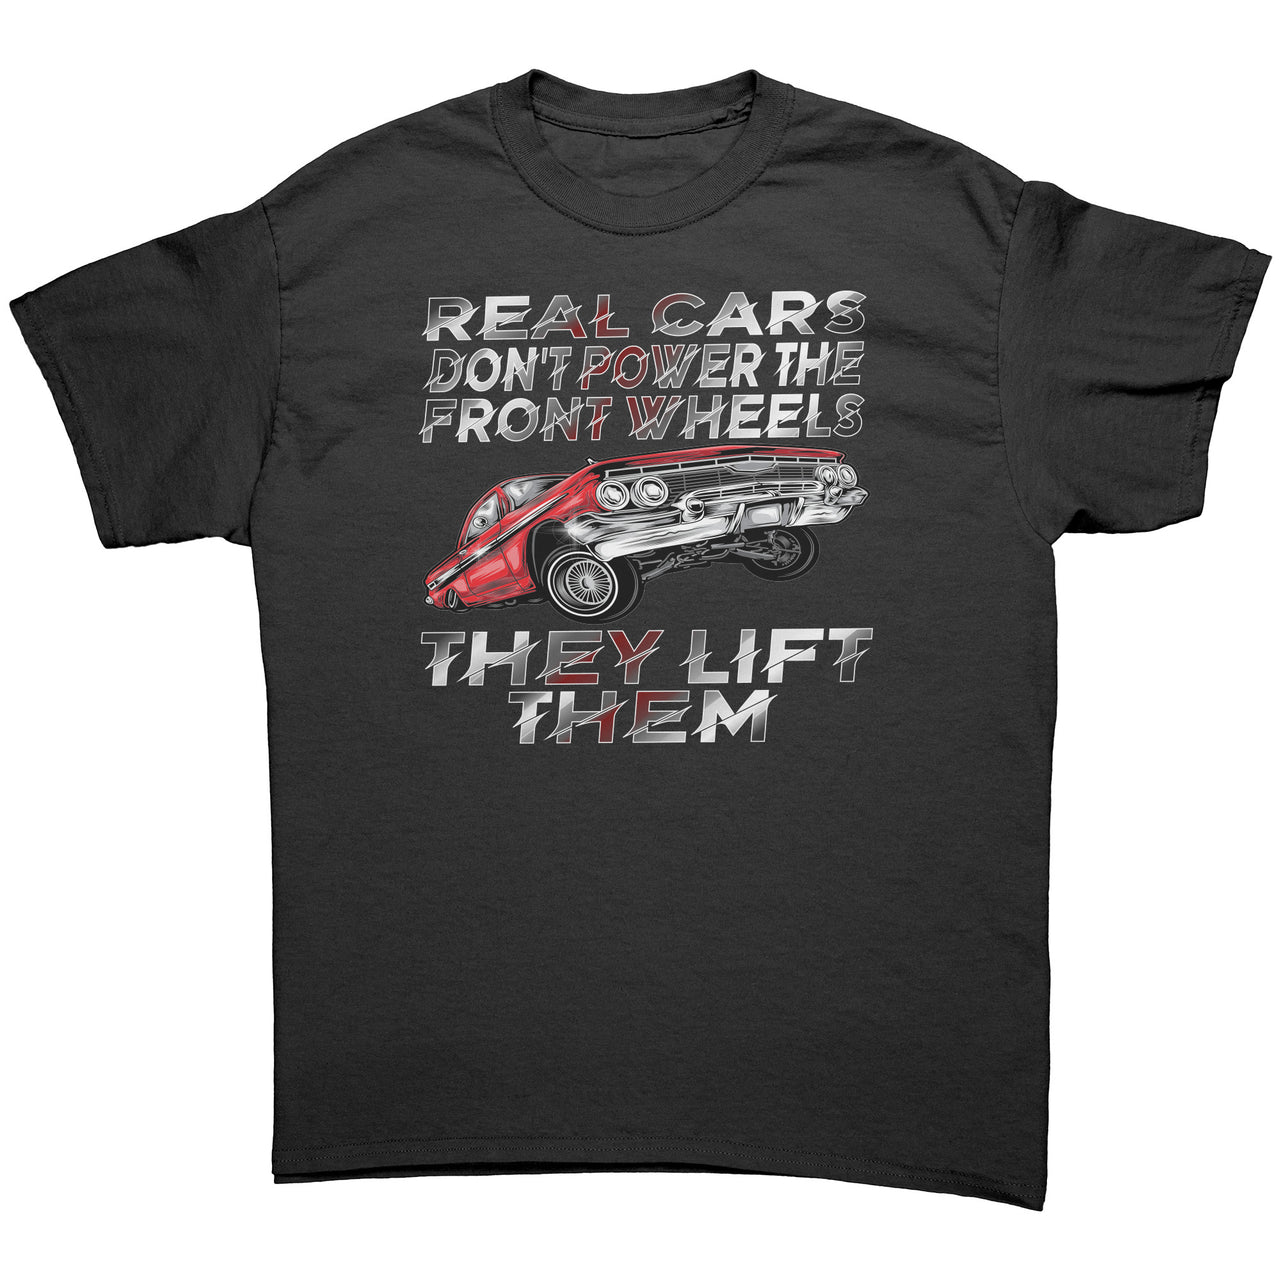 Real Cars Don't Power The Front Wheels They Lift Them T-Shirts